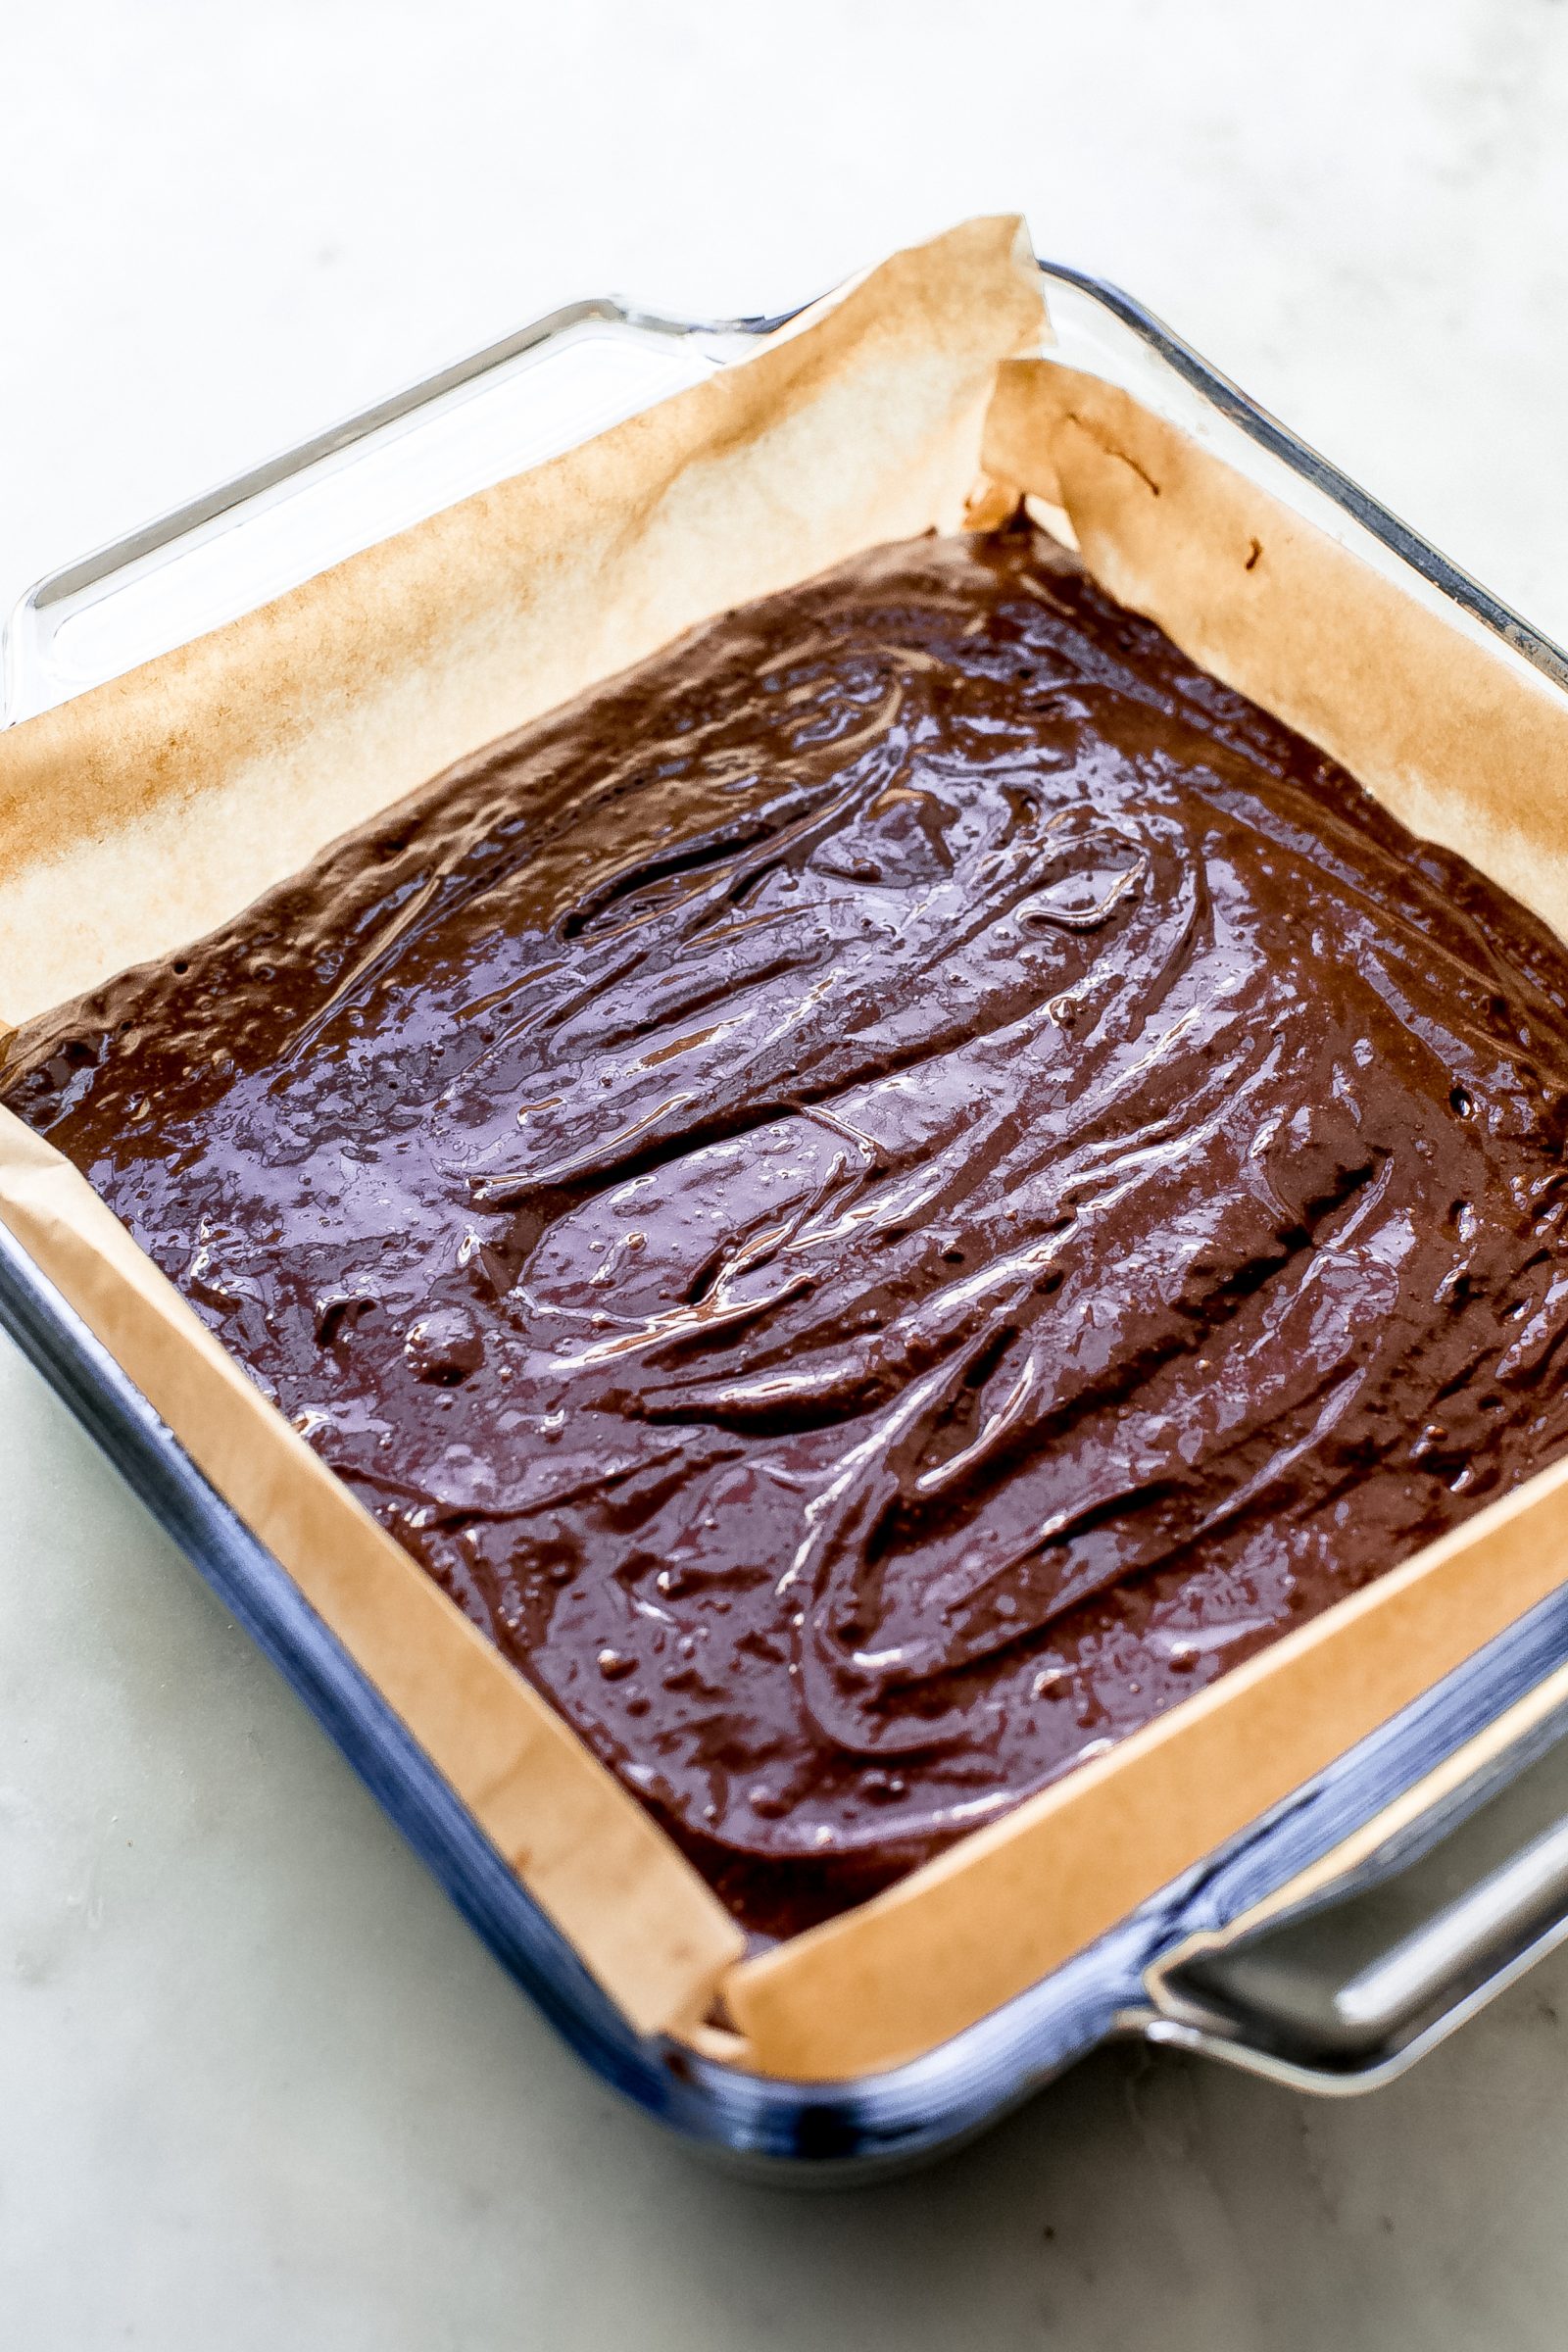 fudge brownie mixture spread in a glass baking dish lined with parchment paper